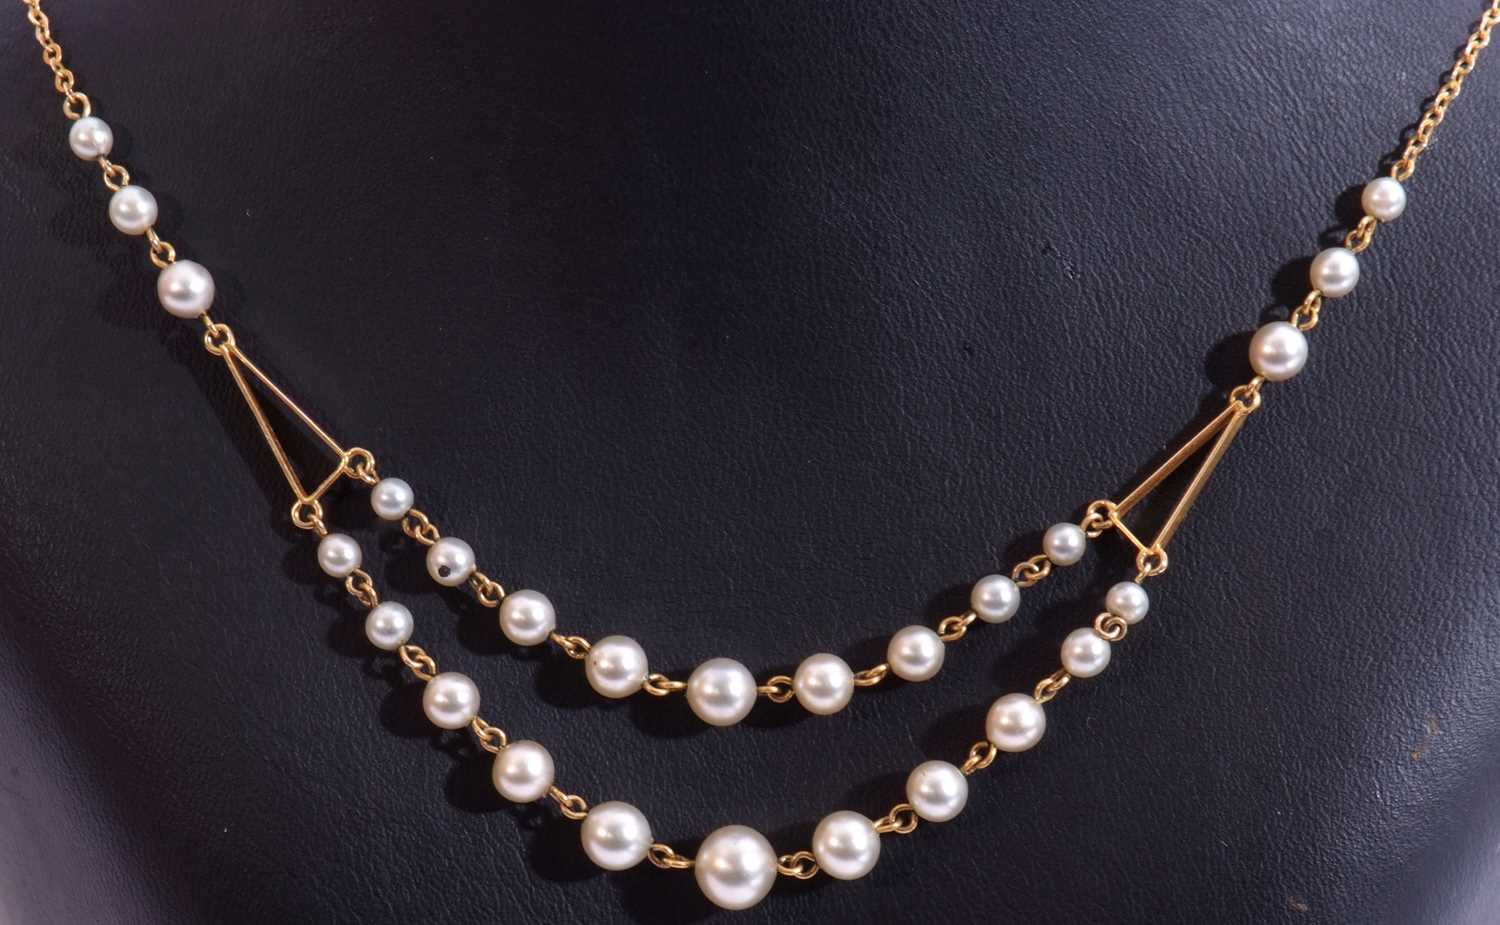 Modern double row simulated pearl necklace, a design with graduated grey pearls suspended from - Image 2 of 2